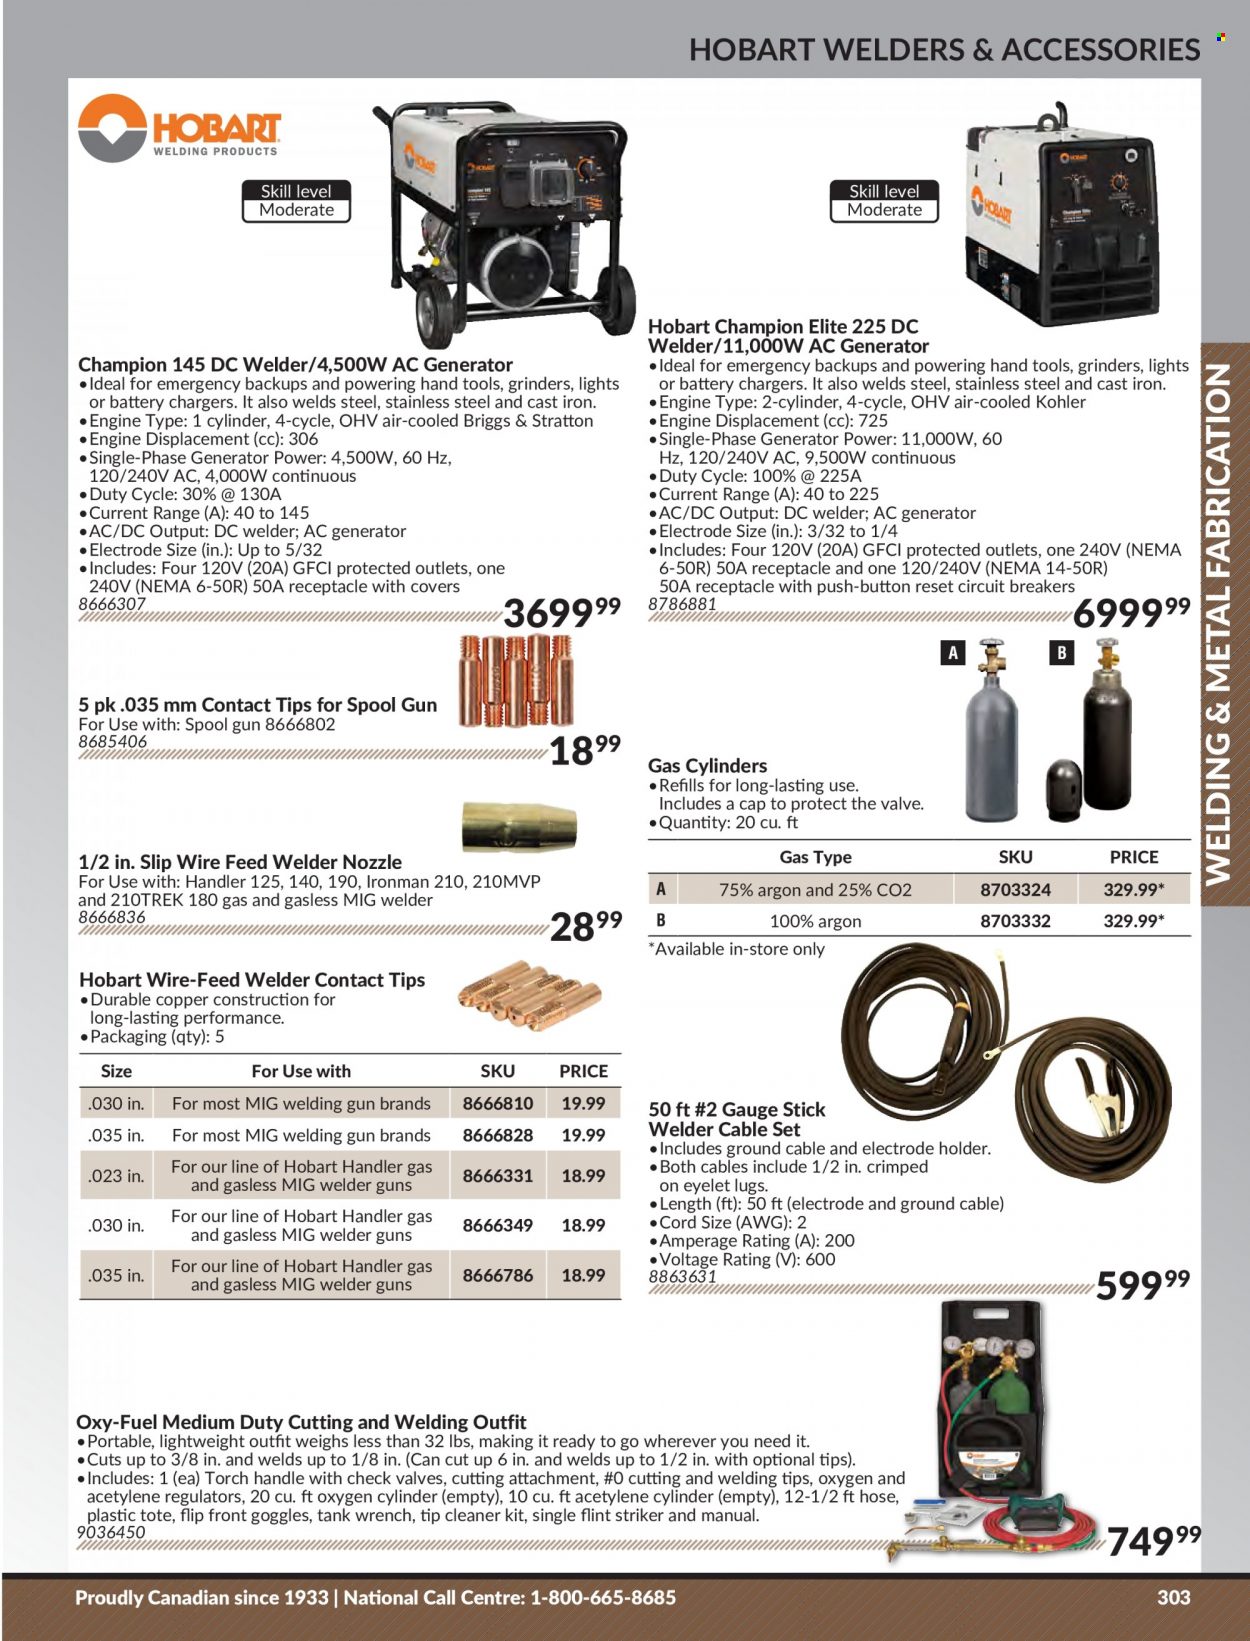 Princess Auto Flyer - Sales products - tank, tote, hand tools, inverter welder, generator, welder, battery charger, cleaner. Page 309.